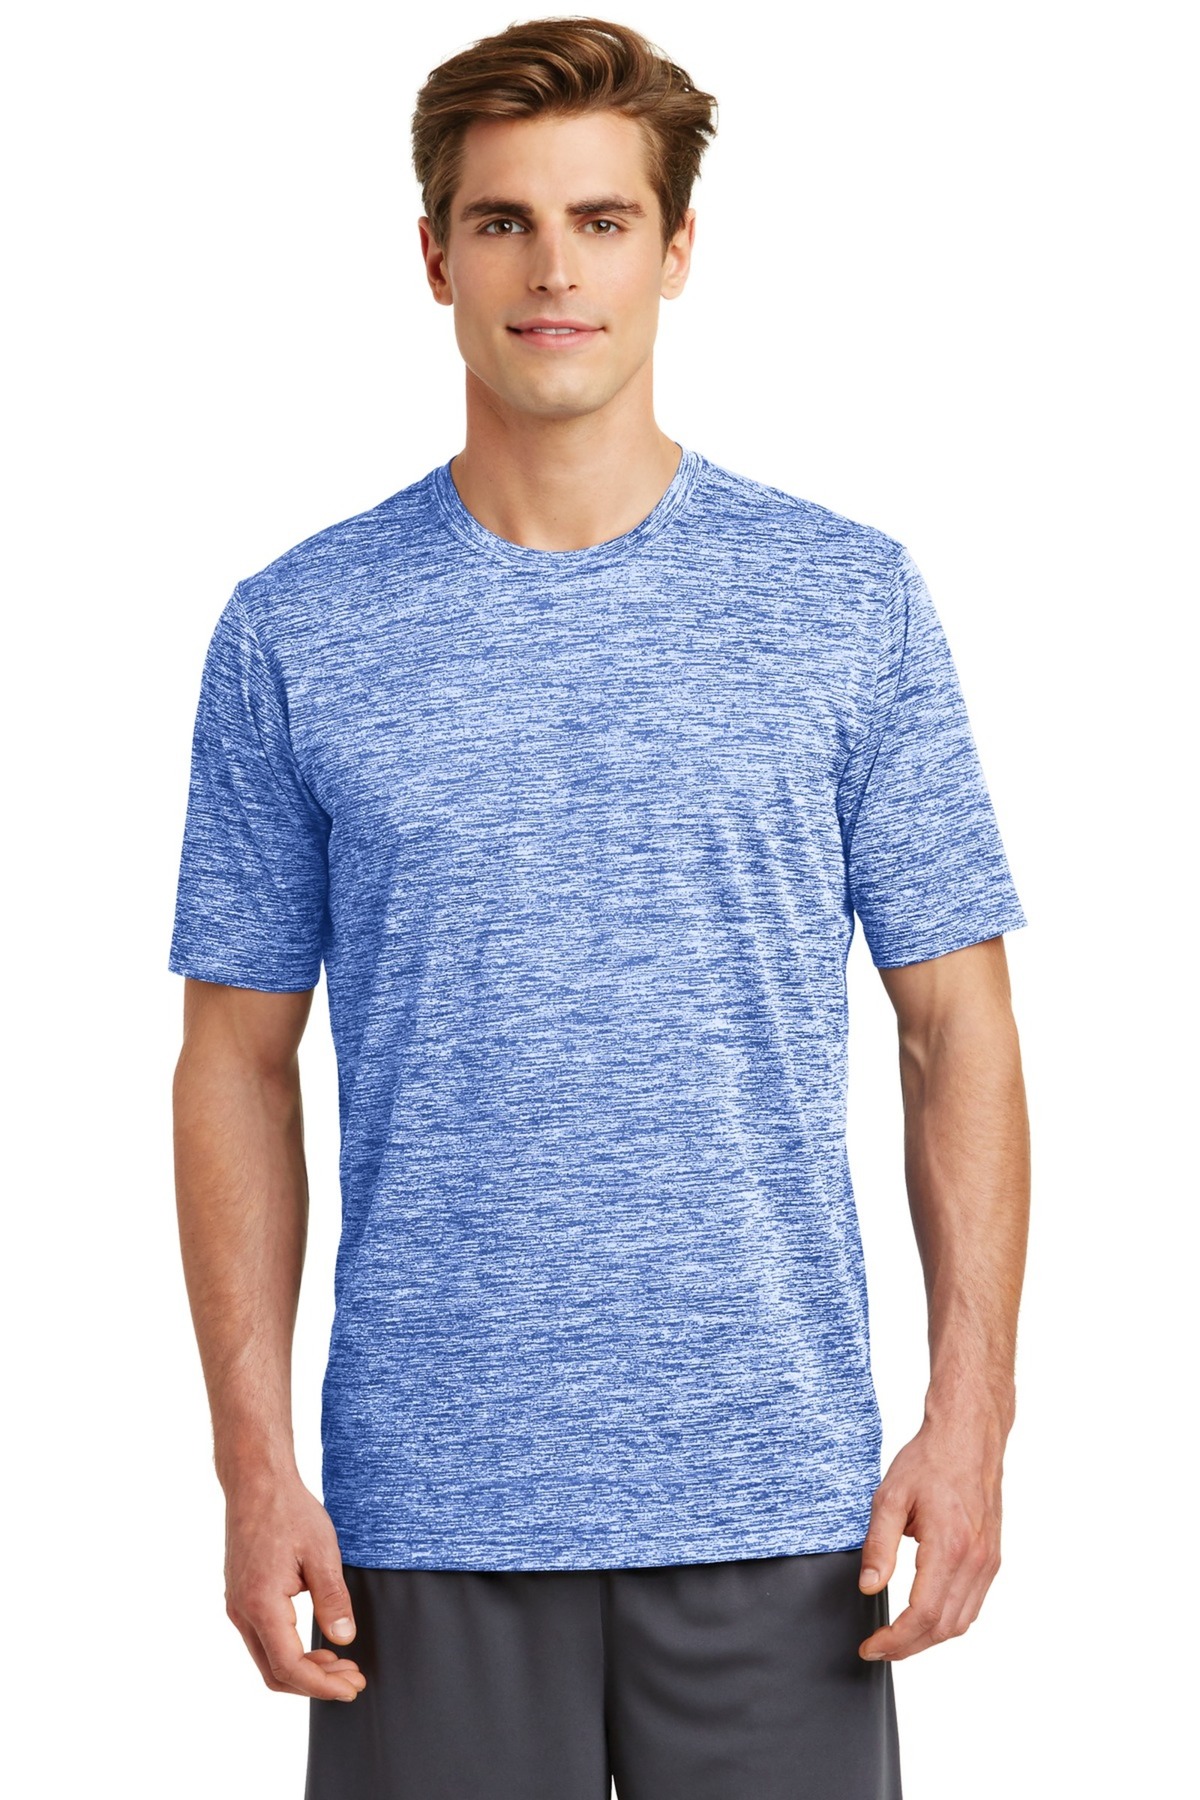 Sport-Tek Embroidered Men's PosiCharge Electric Heather Tee | T-Shirts ...